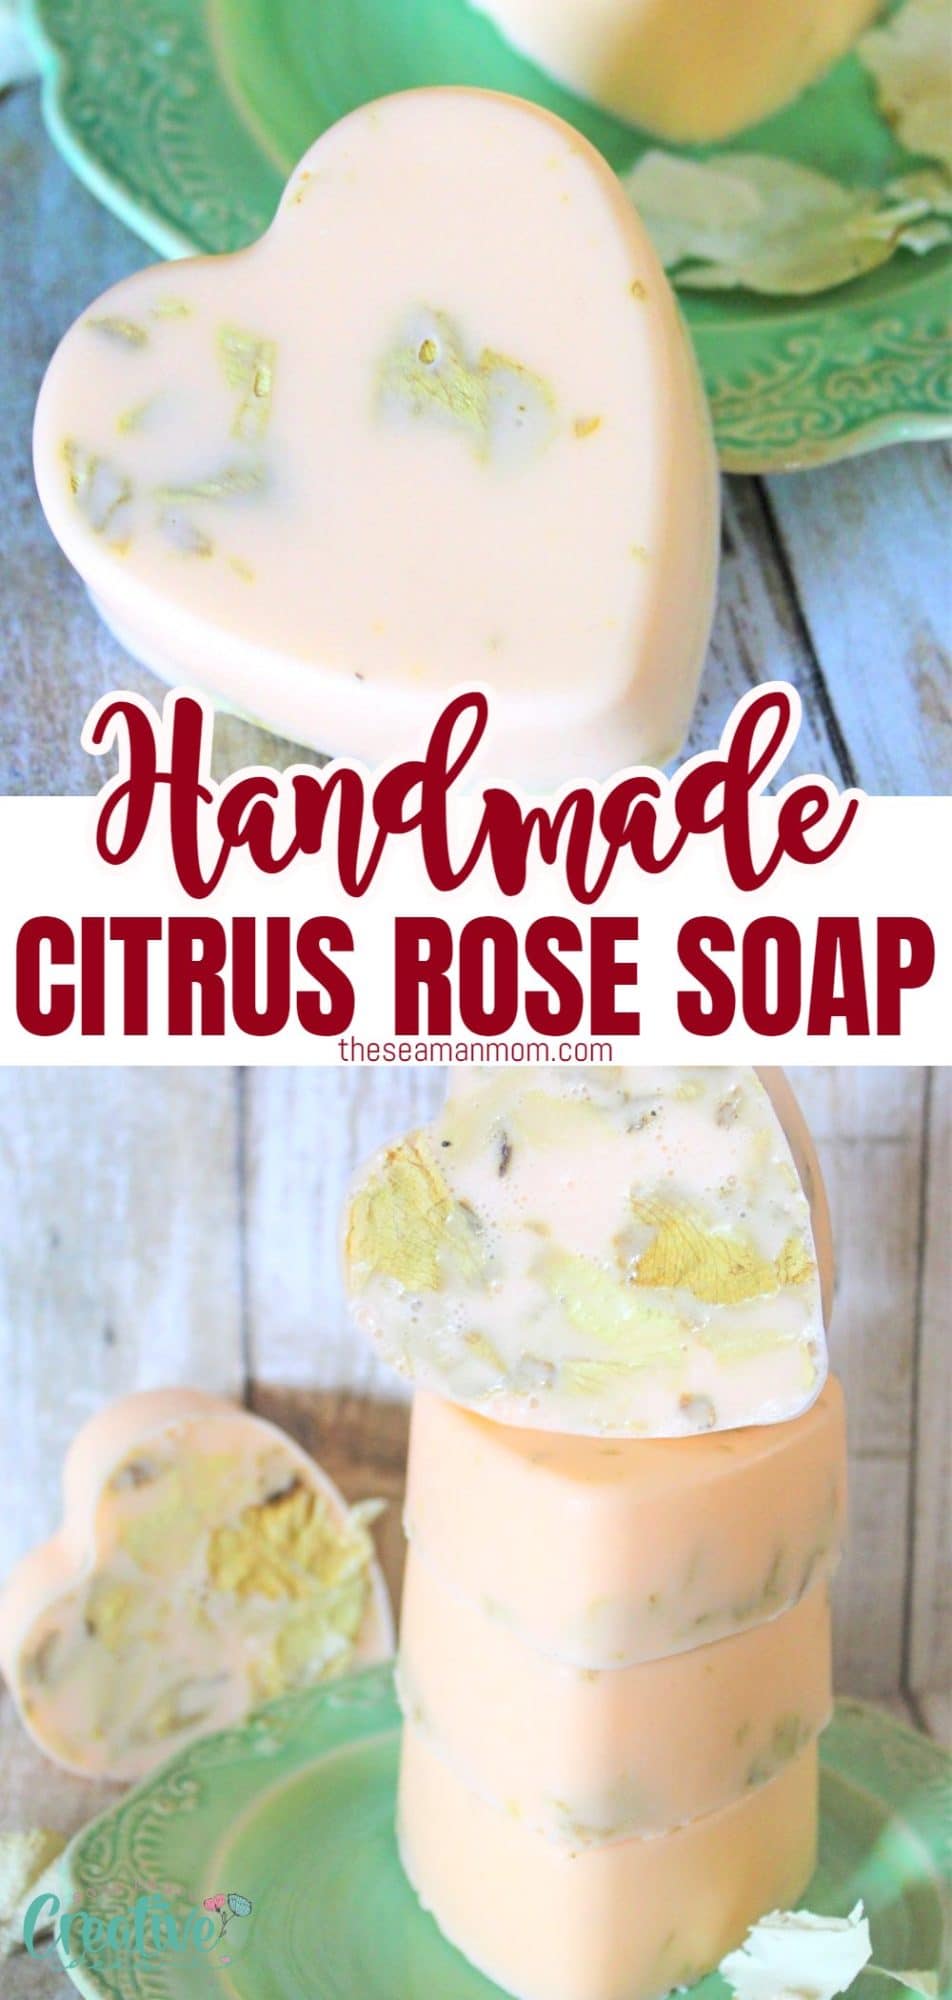 Photo collage of handmade rose soap with rose petals